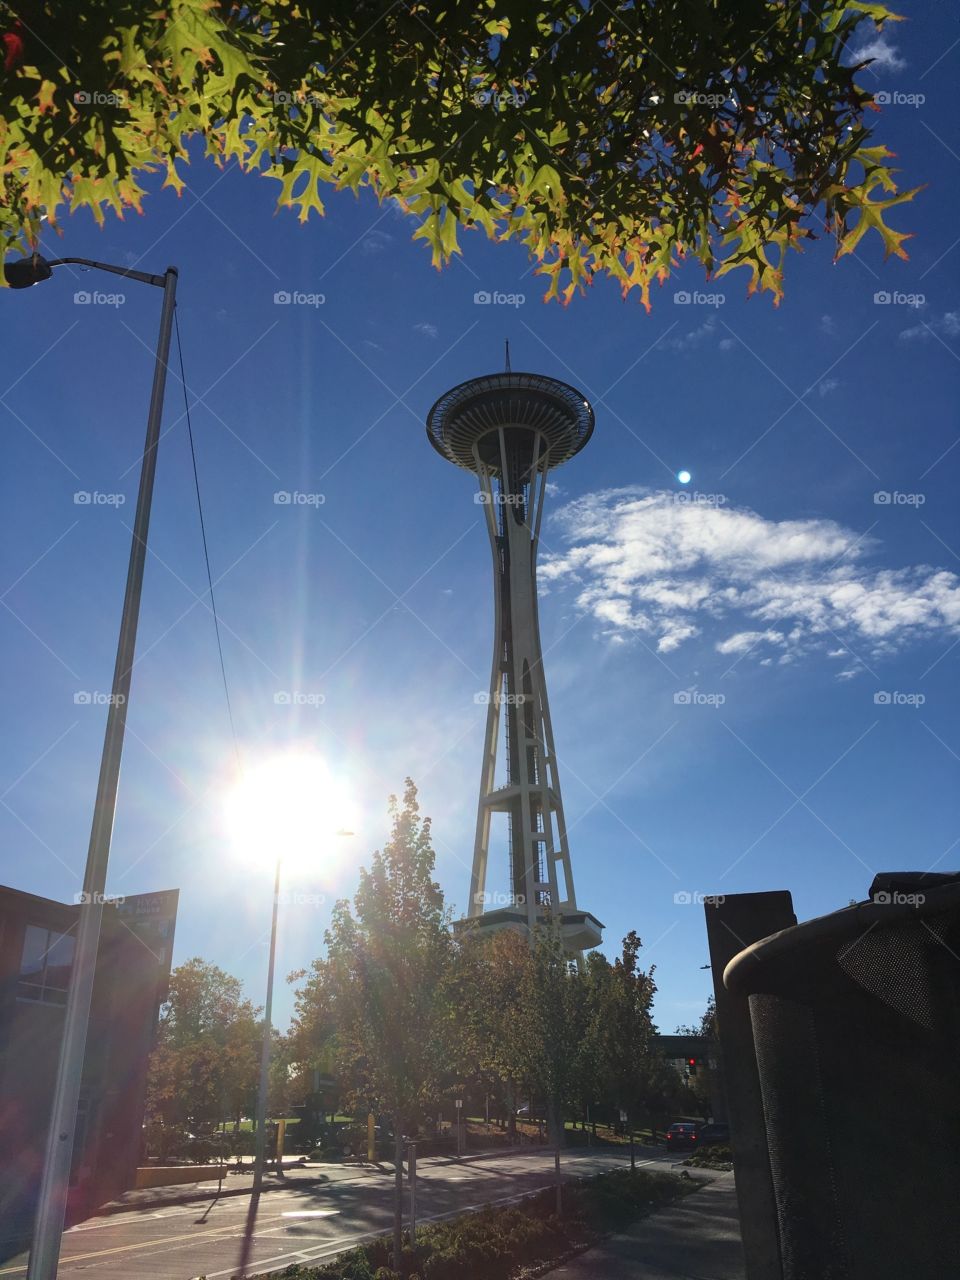 Space needle in Seattle during fall.